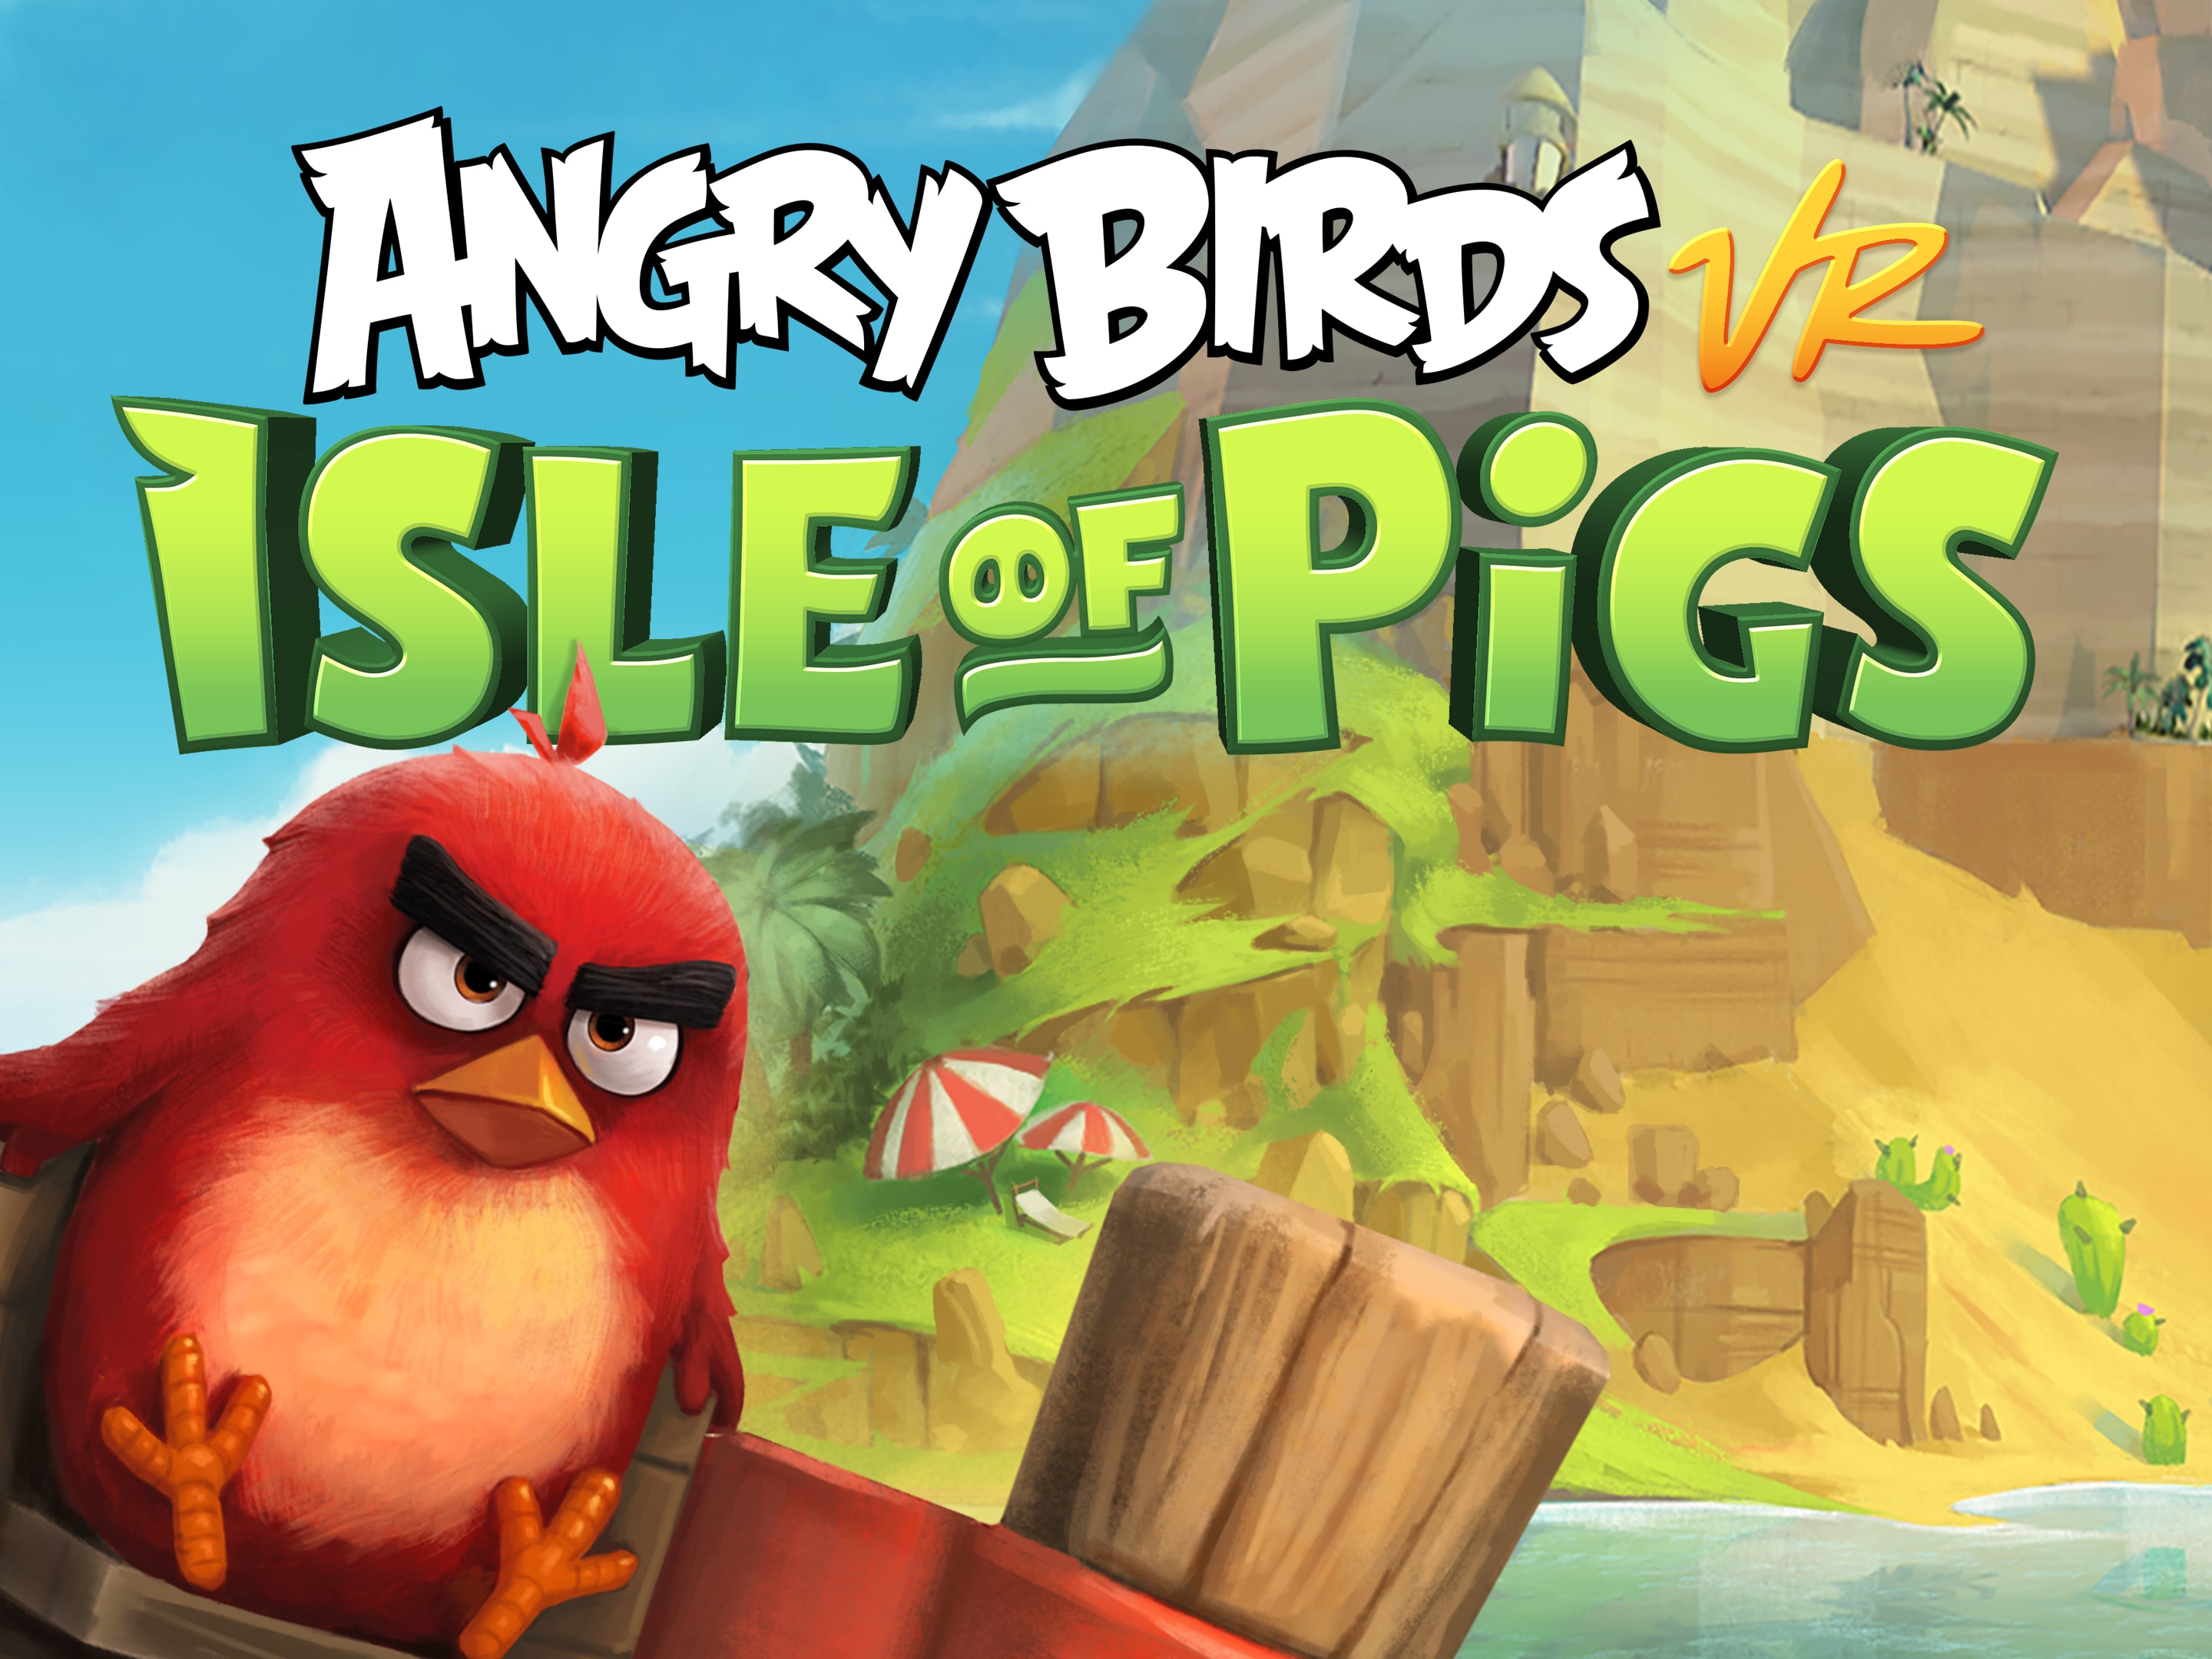 Angry Birds 4.0 - Download for PC Free